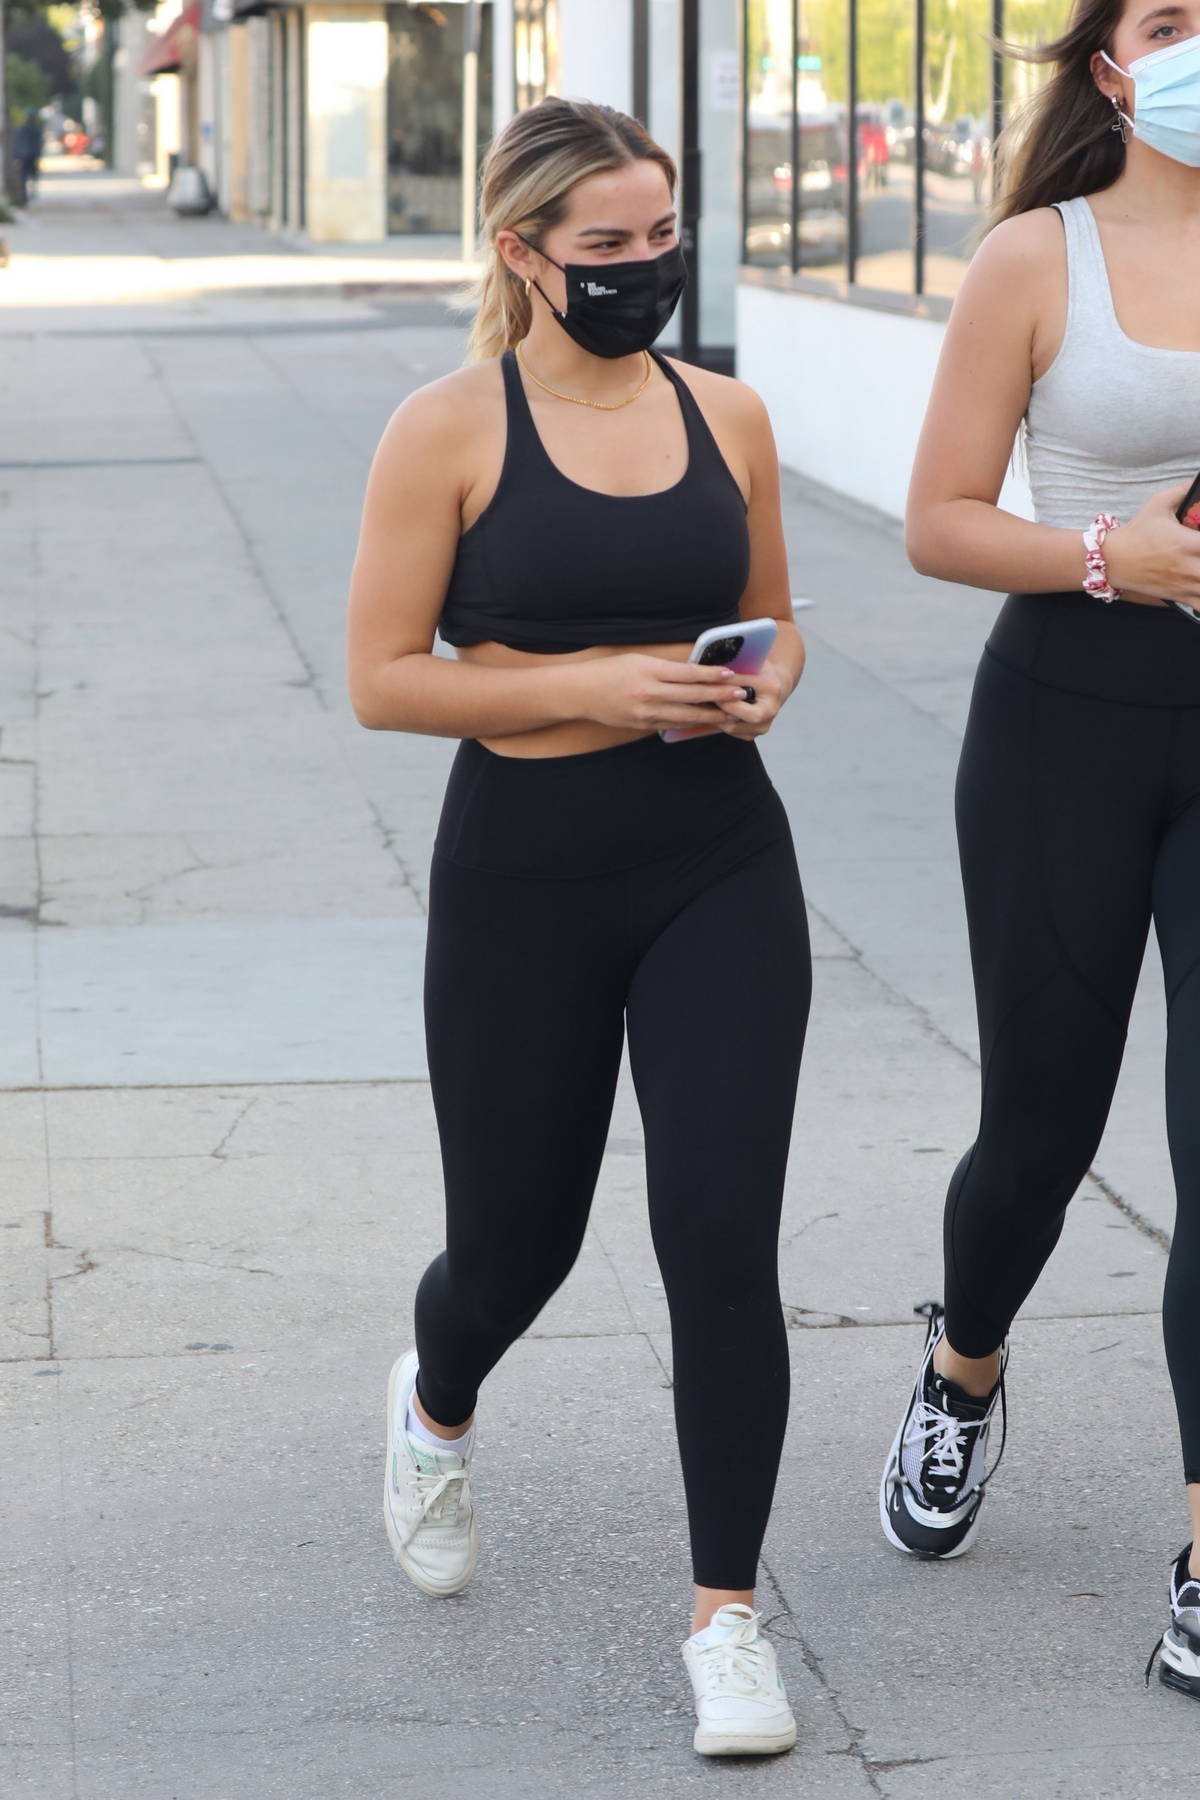 addison rae flaunts her curves in black leggings while grabbing a